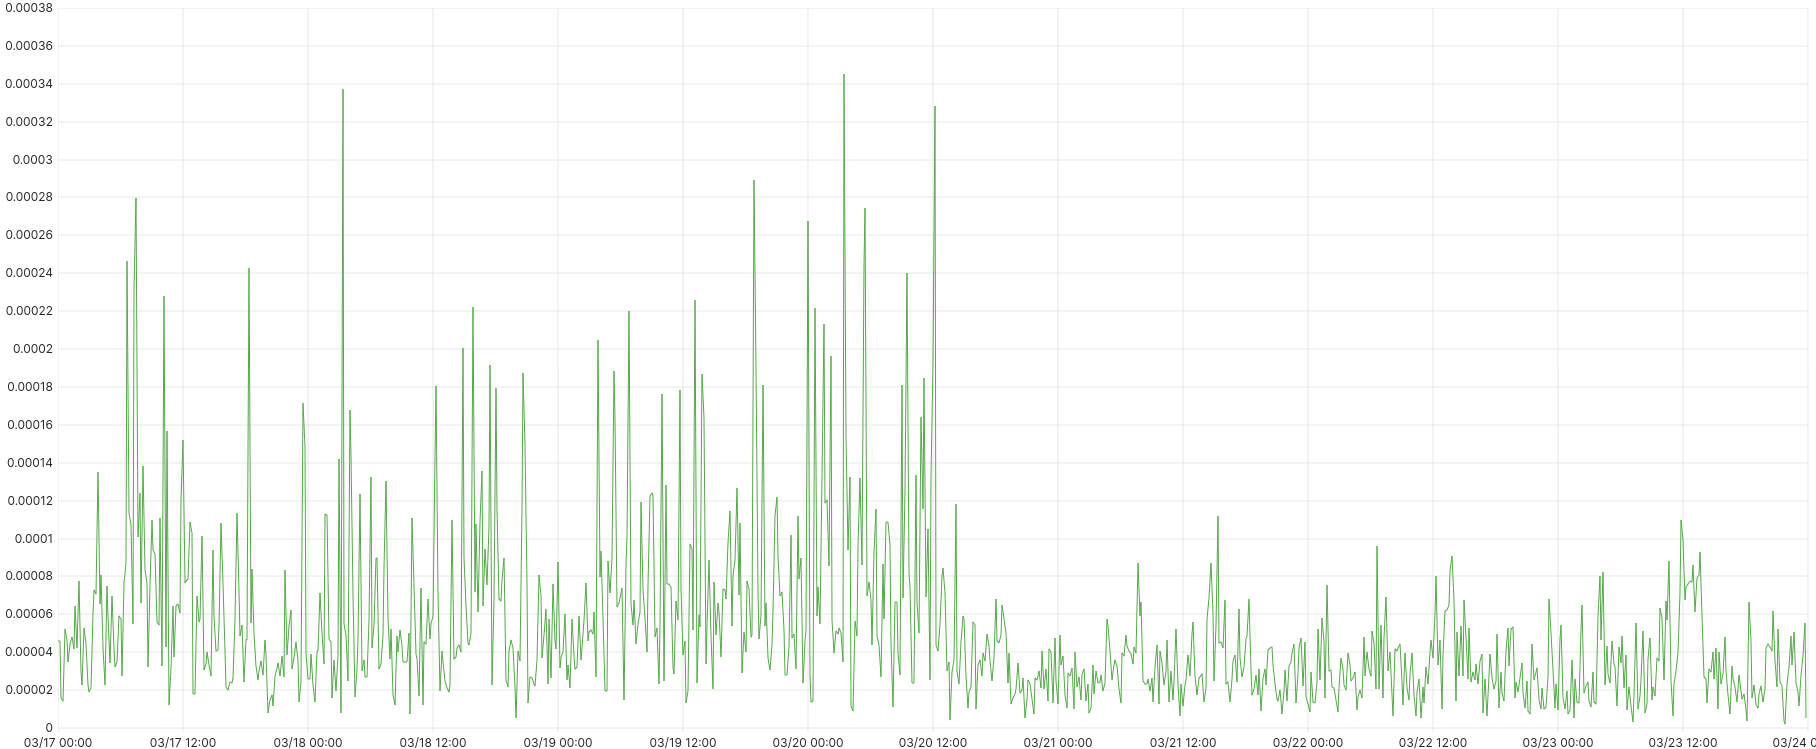 (One week graph of ntpd system jitter)